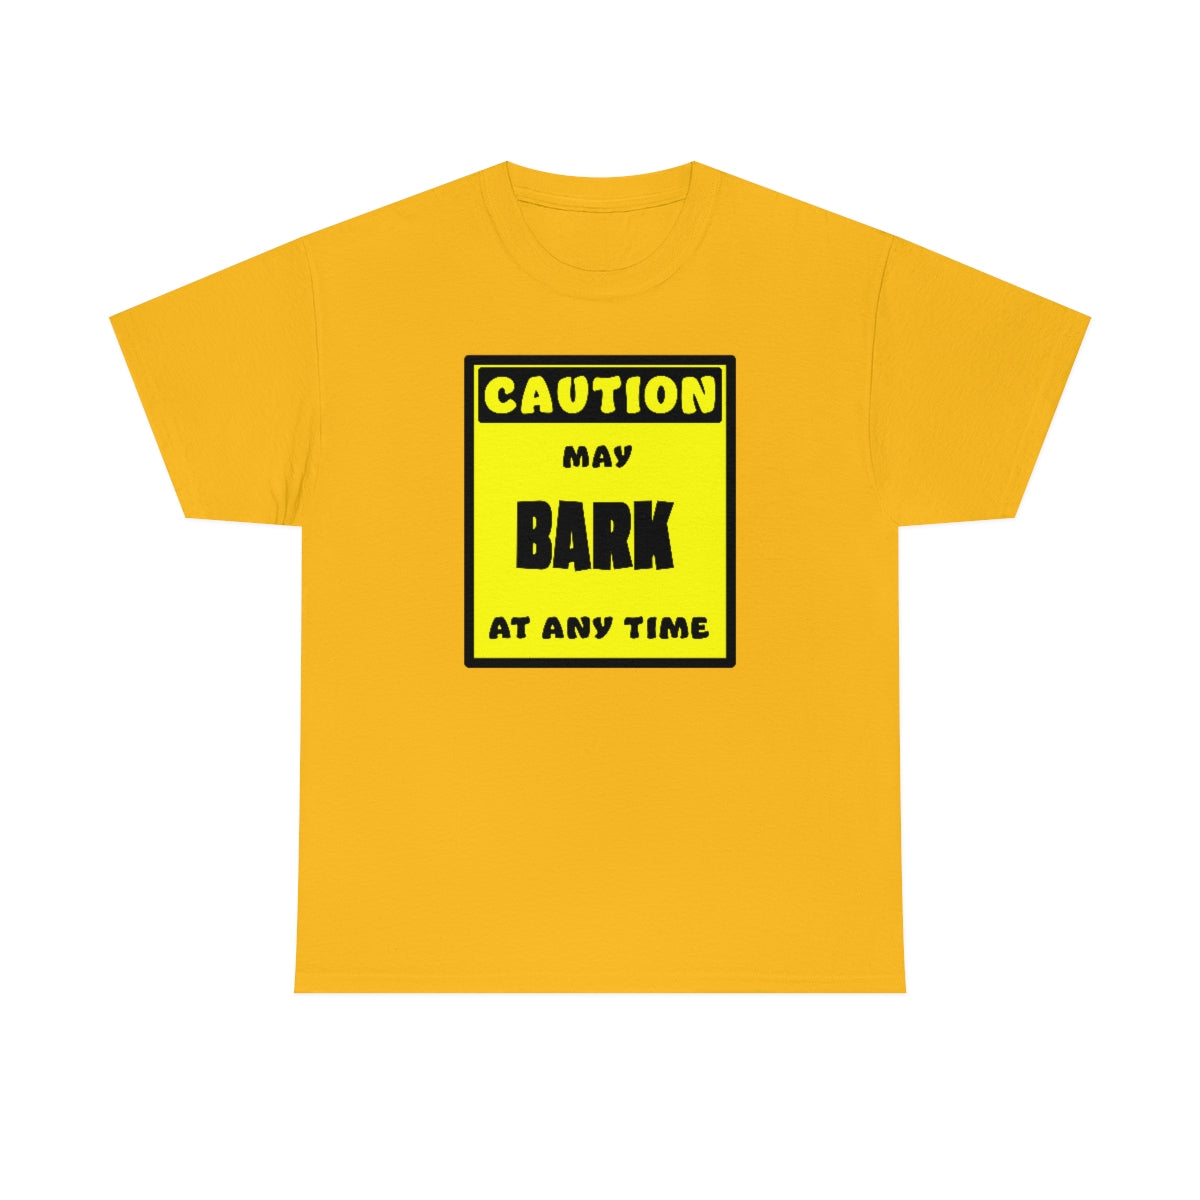 CAUTION! May BARK at any time! - T-Shirt T-Shirt AFLT-Whootorca Gold S 